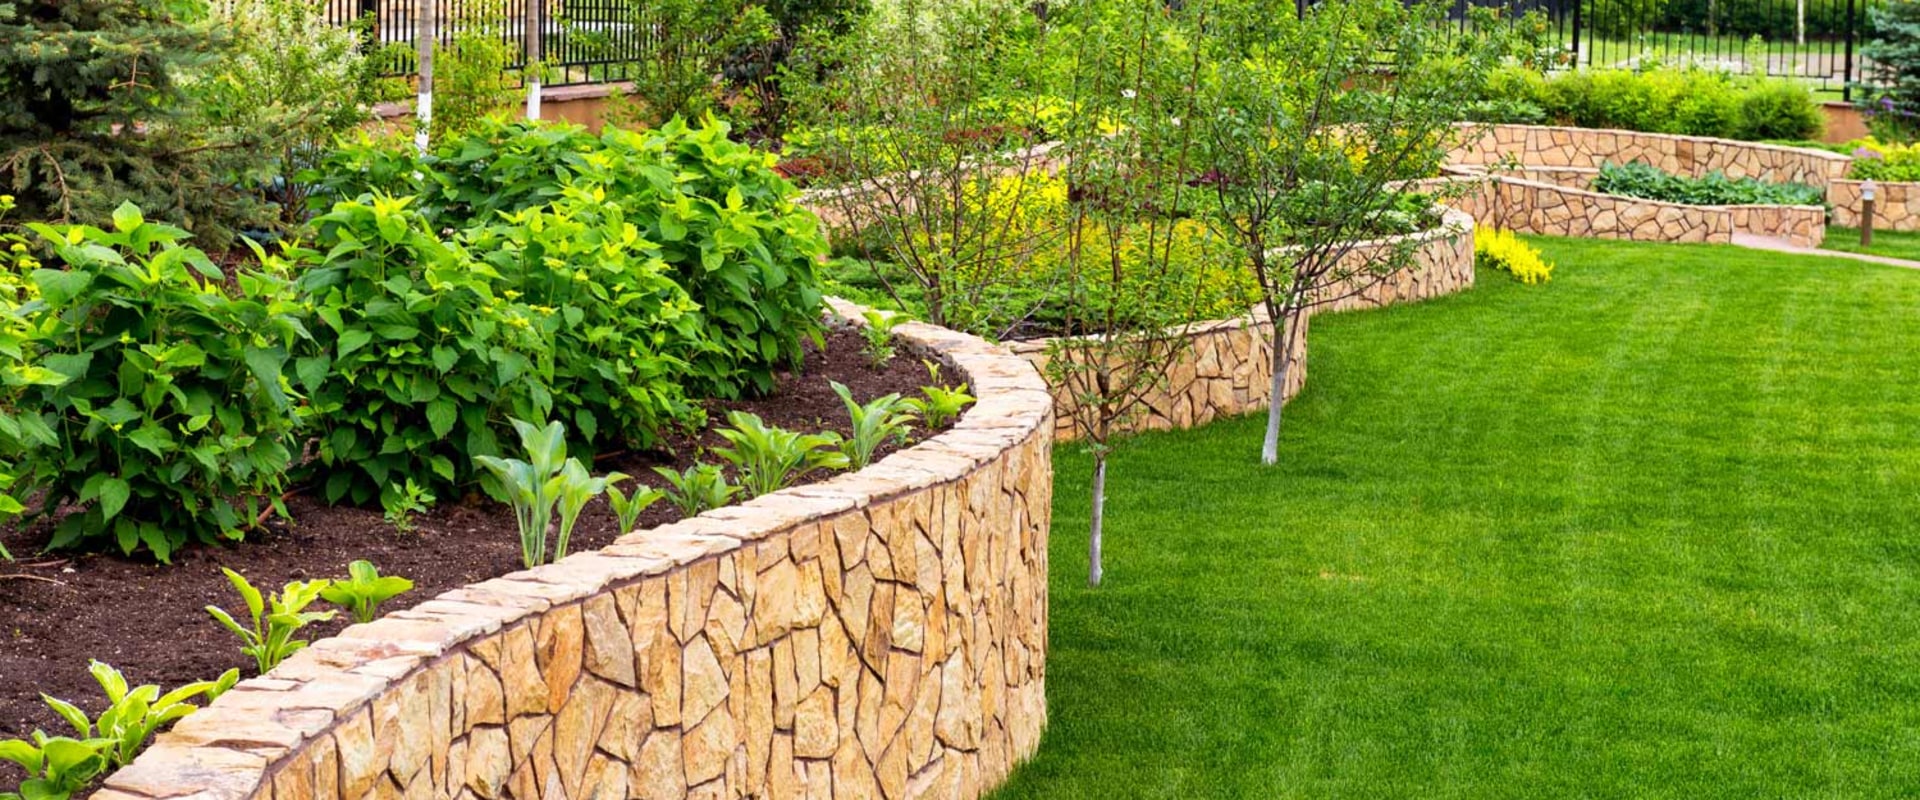 How to Calculate Labor Cost for Landscaping Projects